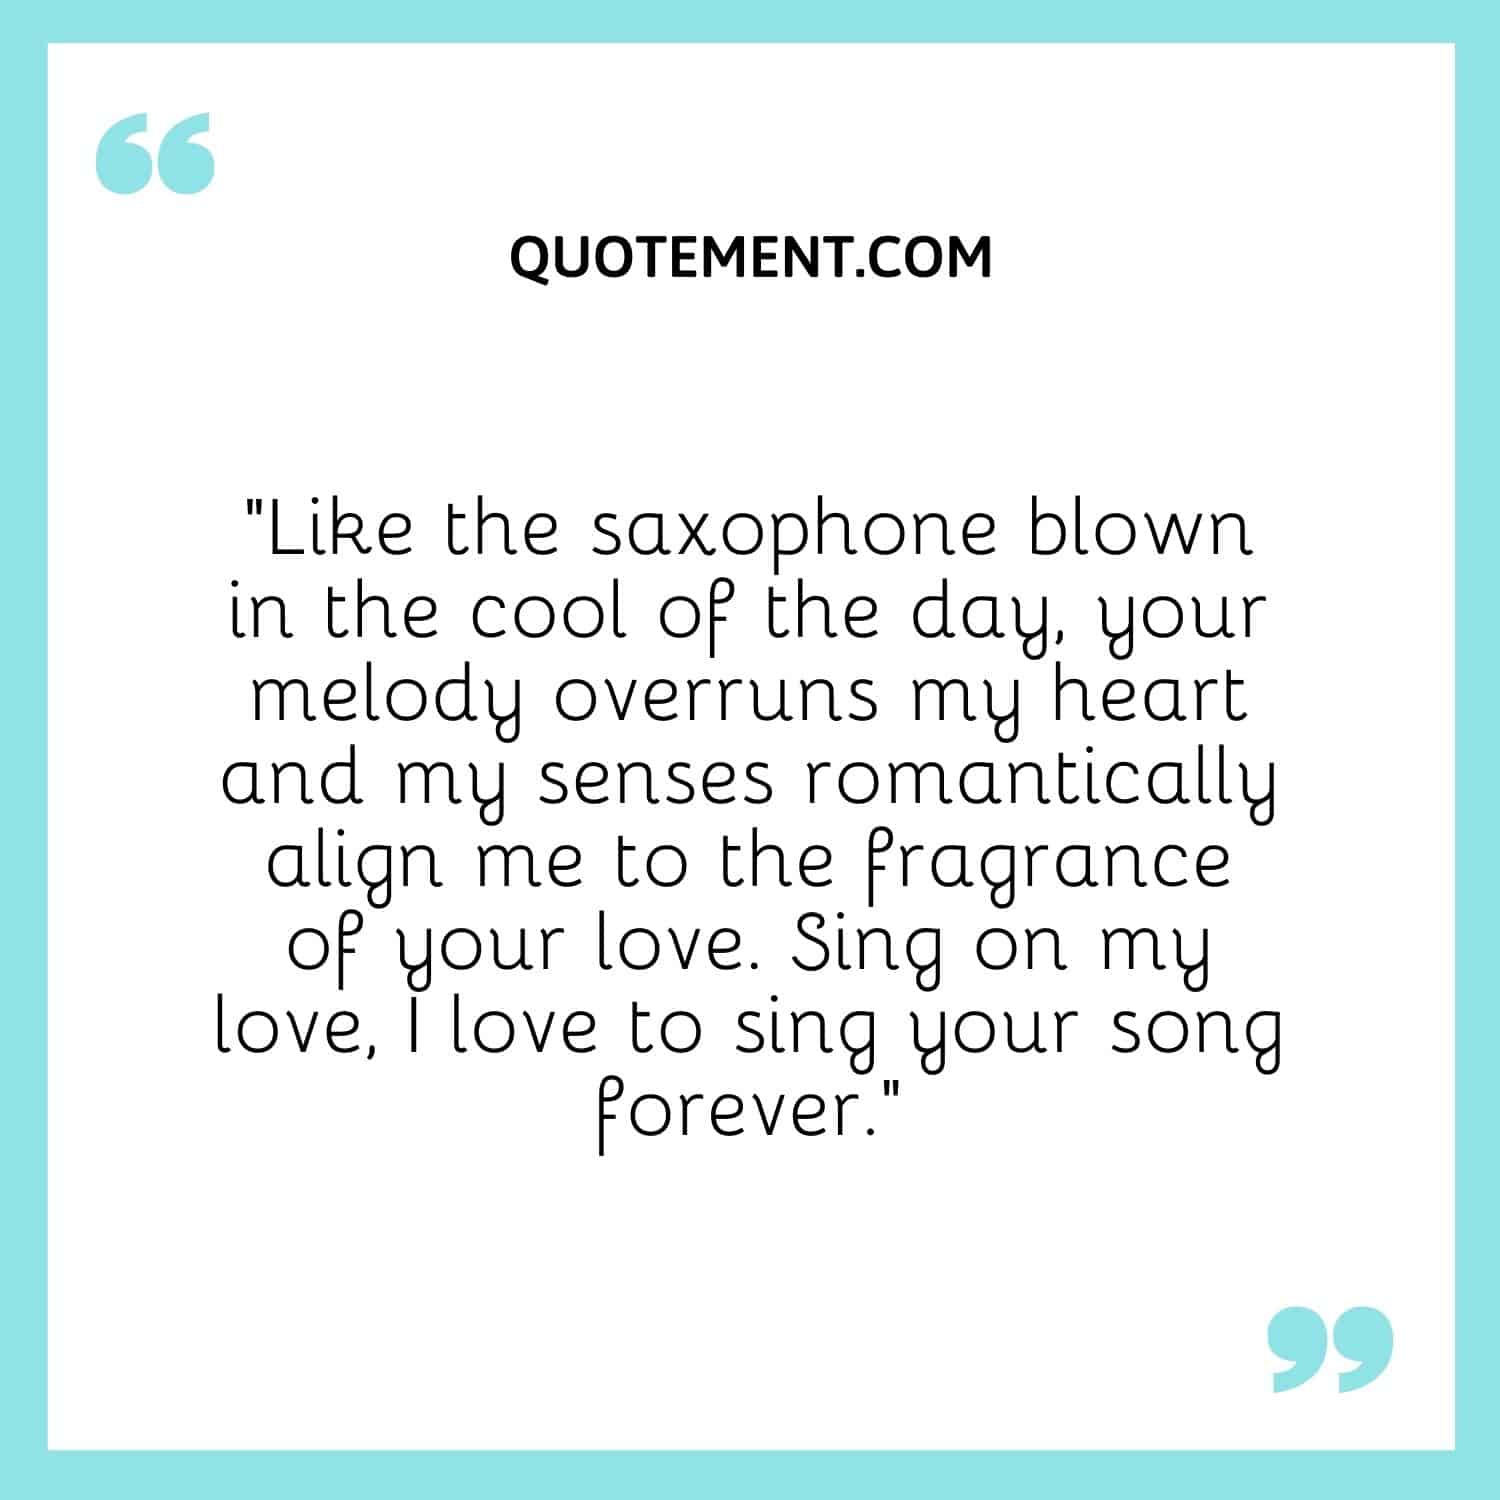 “Like the saxophone blown in the cool of the day, your melody overruns my heart and my senses romantically align me to the fragrance of your love. Sing on my love, I love to sing your song forever.”